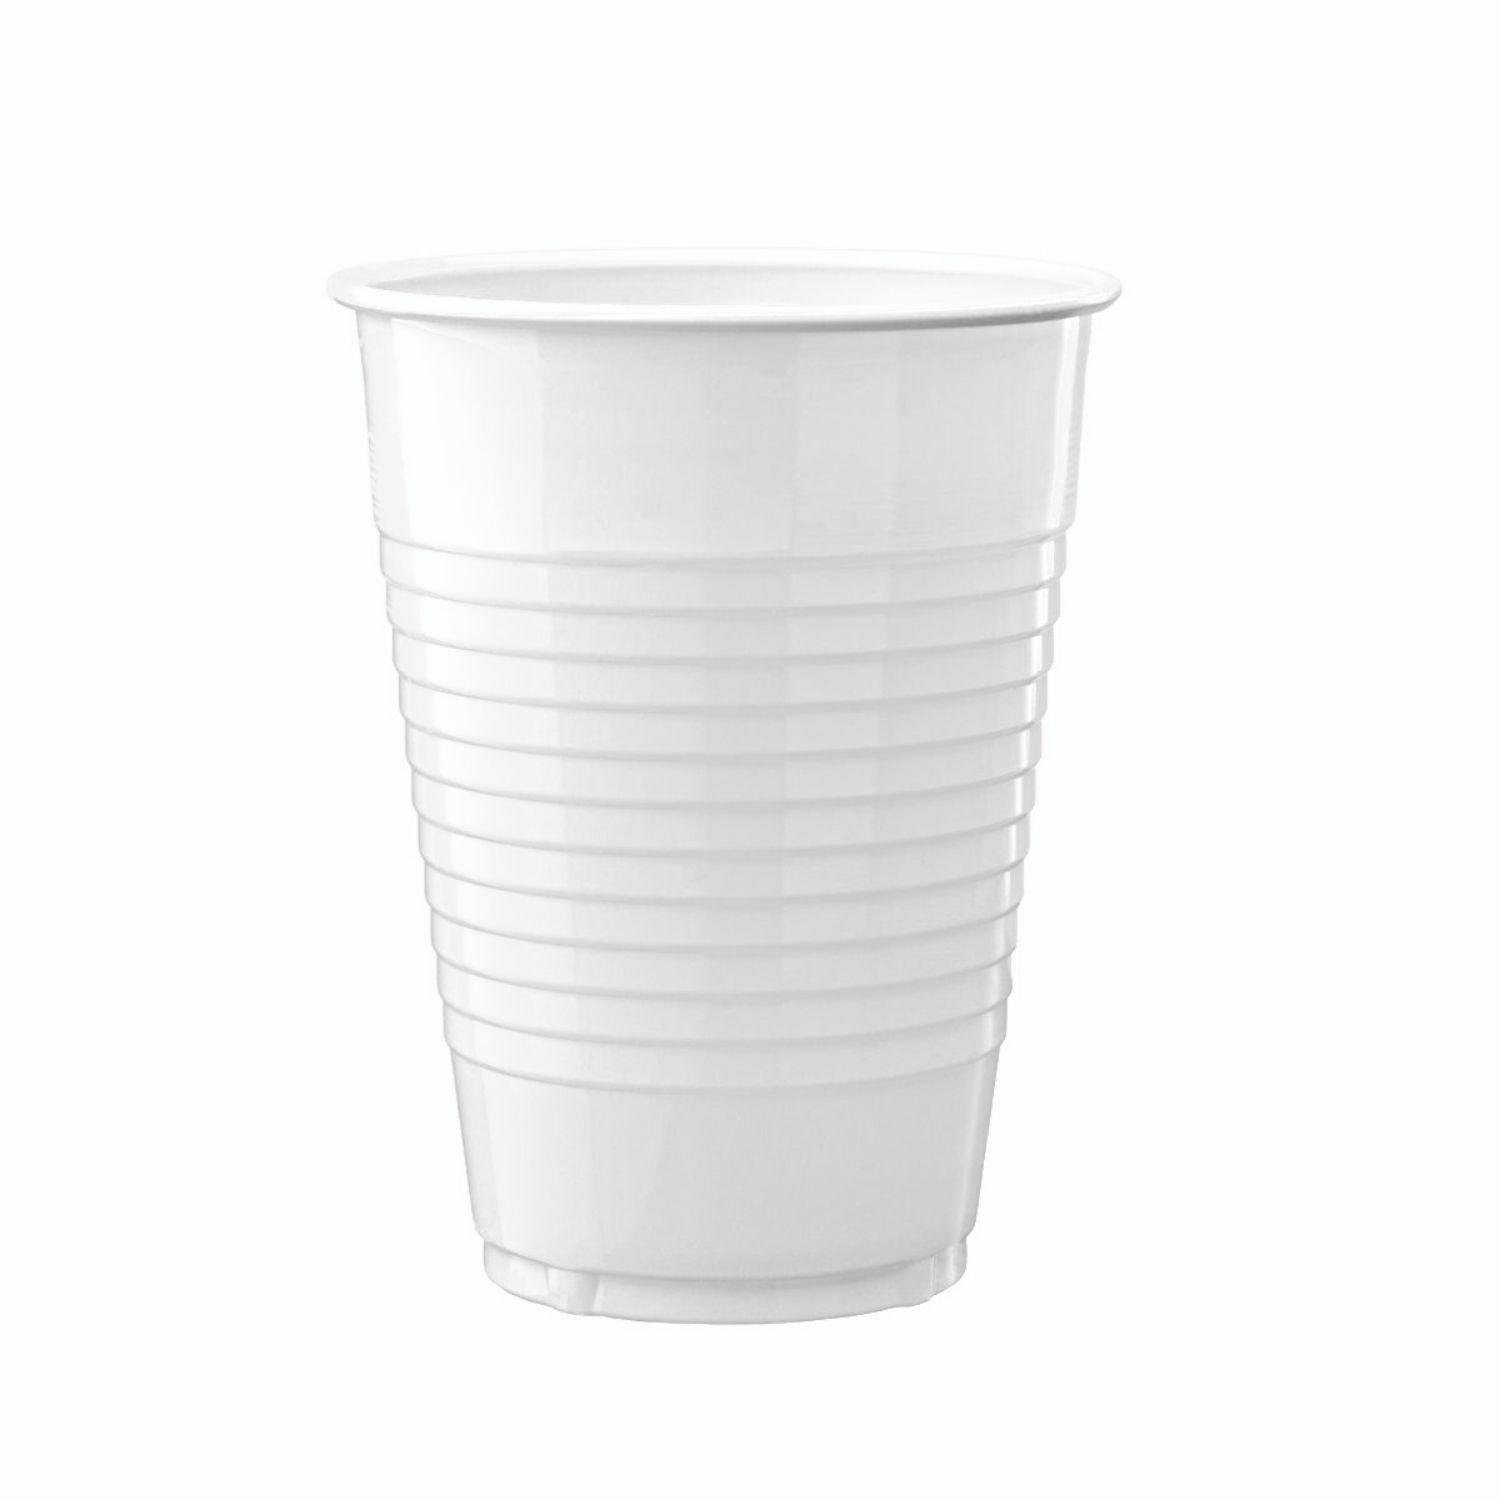 12 Oz. Clear Plastic Cups - 50 Ct.